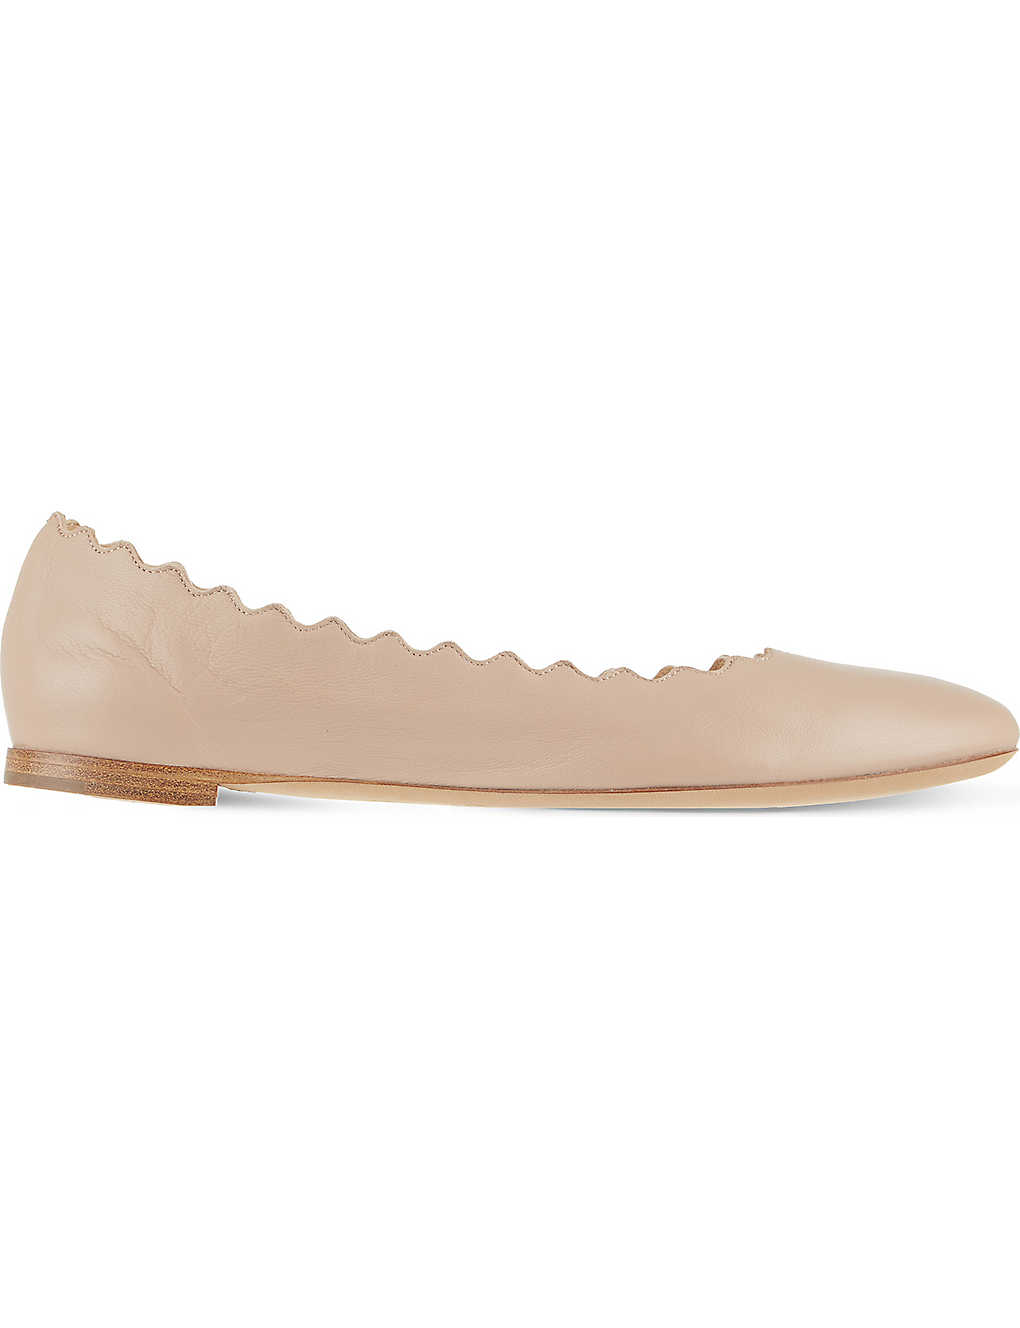 Scallop leather ballet flats(3876126)